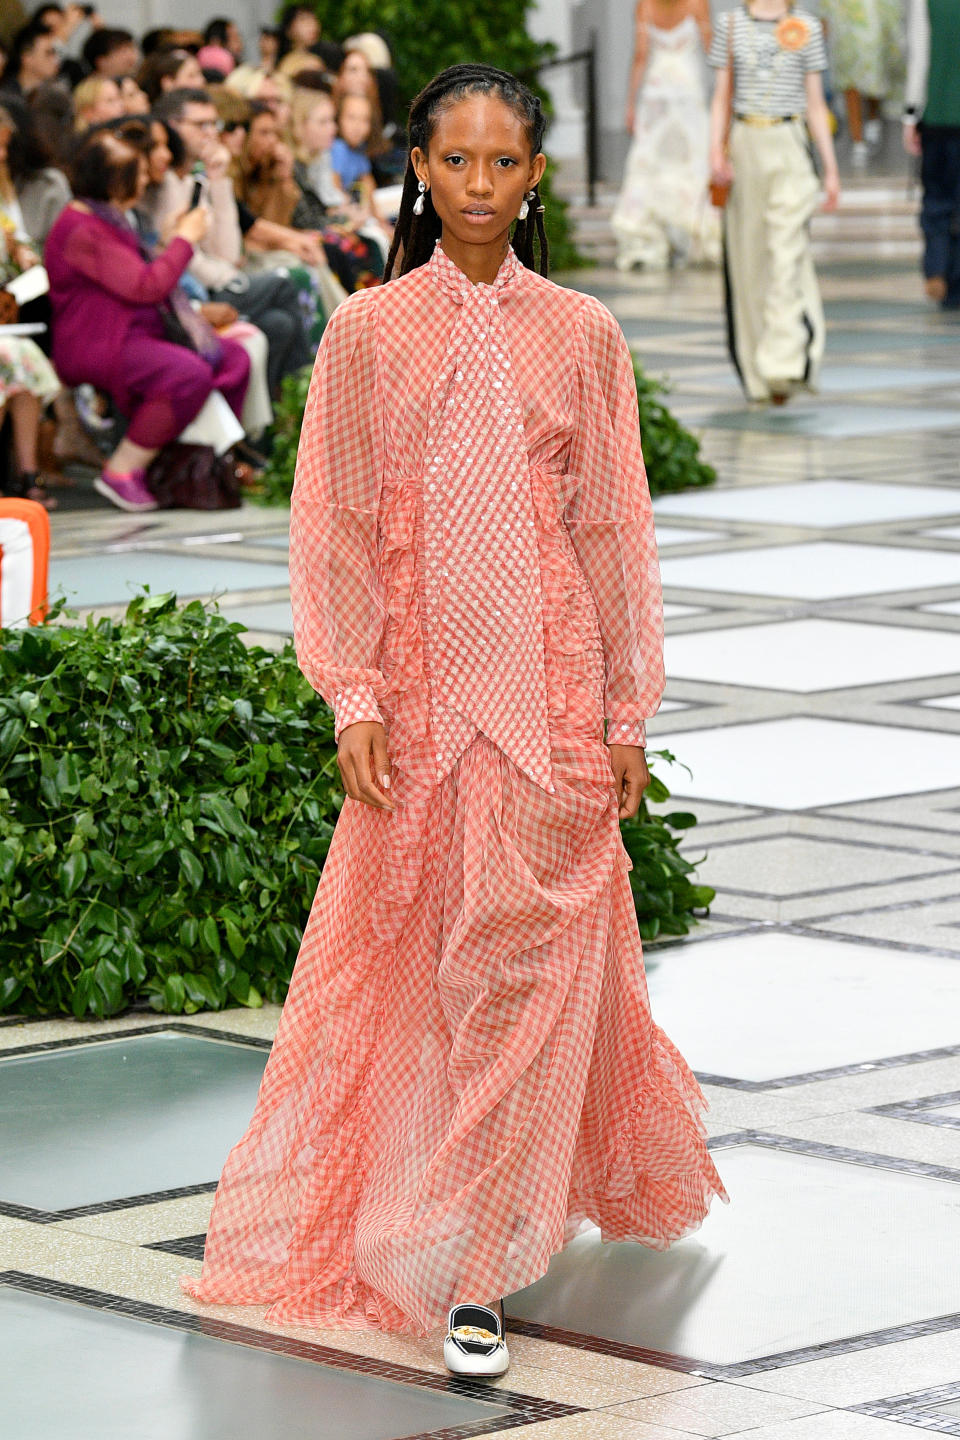 Adesuwa Aighewi walks the runway for Tory Burch during New York Fashion Week on Sept. 8.